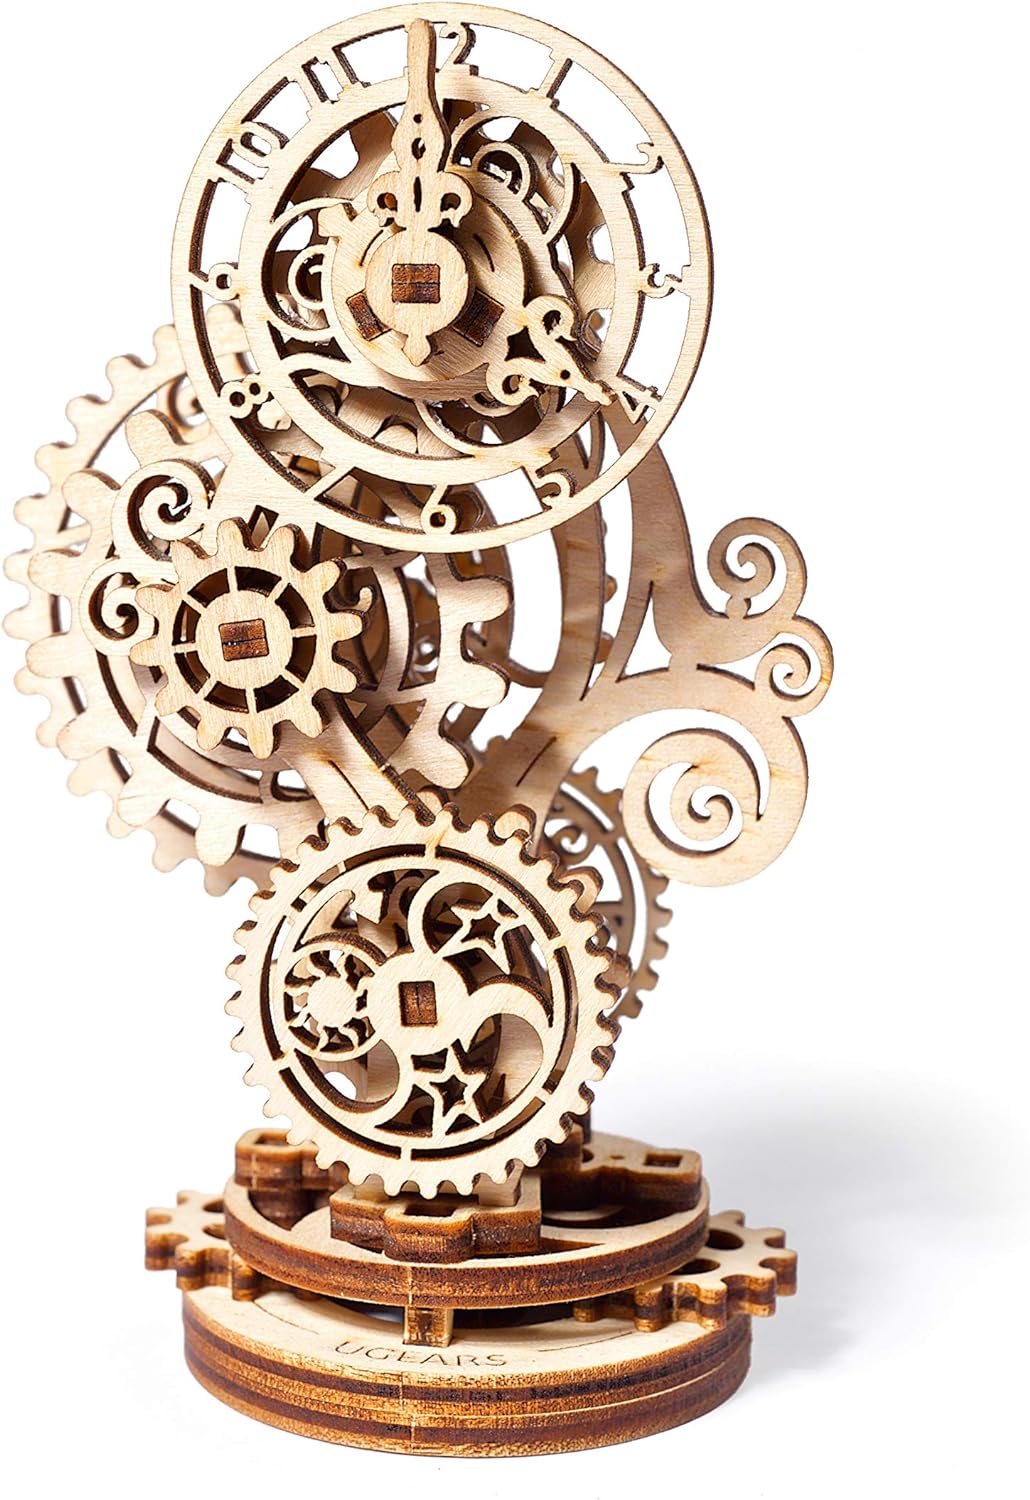 Ugears Steampunk Clock 3D Wooden Puzzle - Wooden Clock Mechanical Model Construction Set - DIY Model Kits for Adults - Ideal Christmas and New Year Gift - Gorgeous Home Dcor